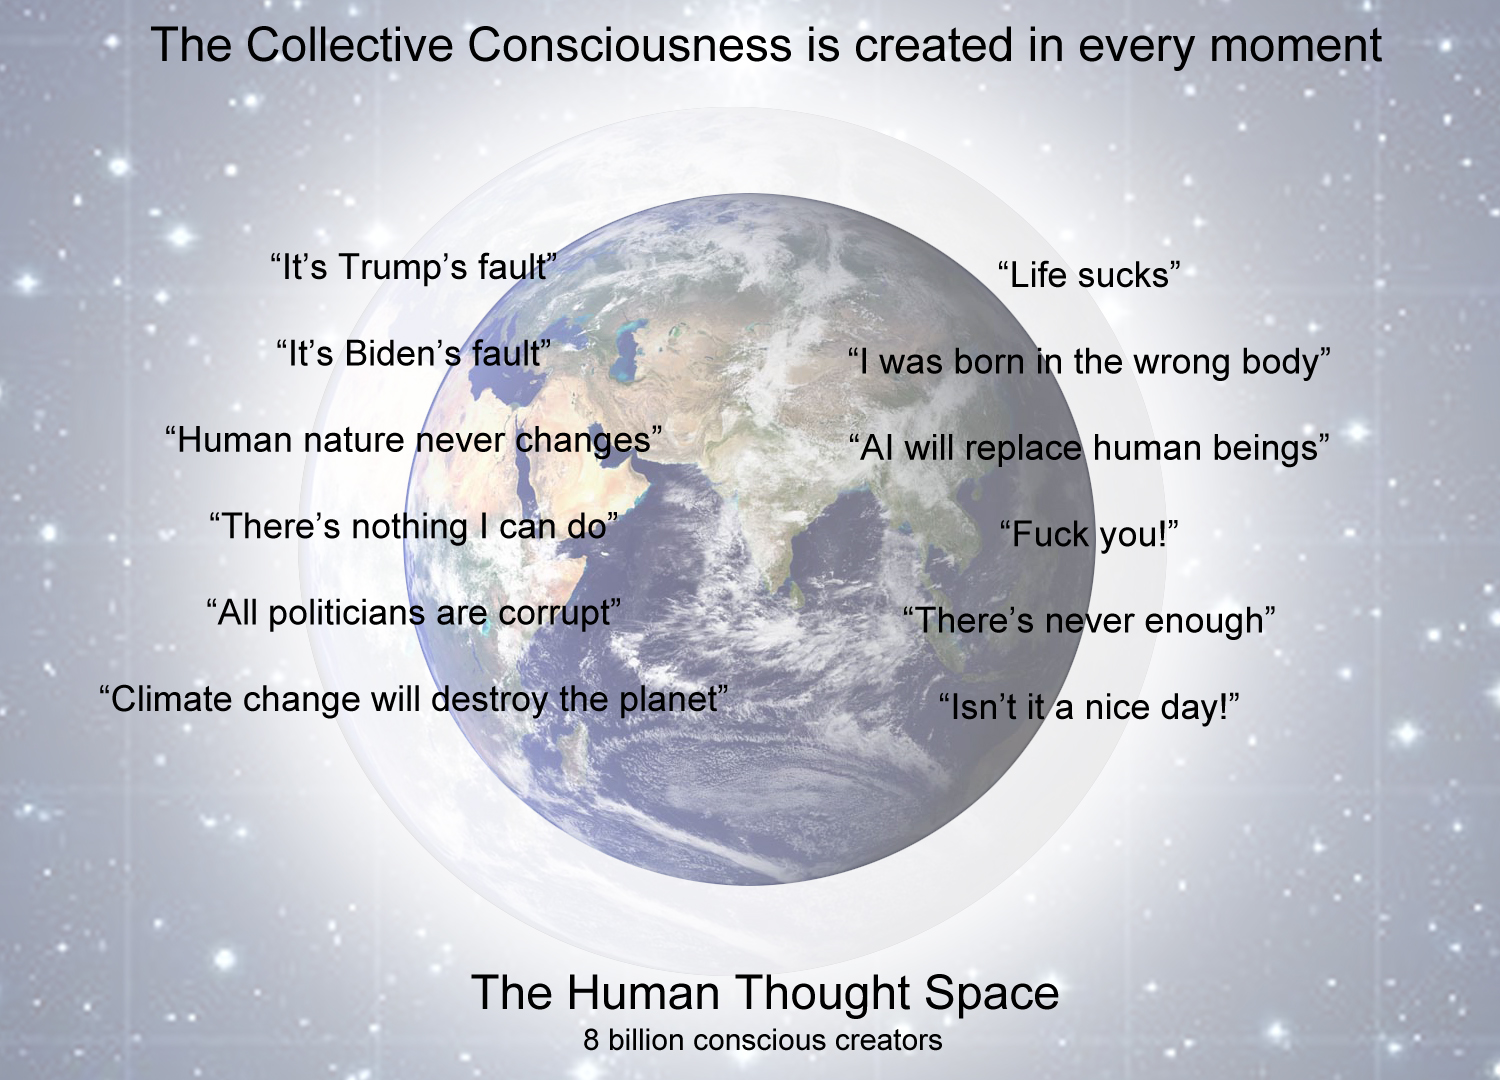 The human thought space